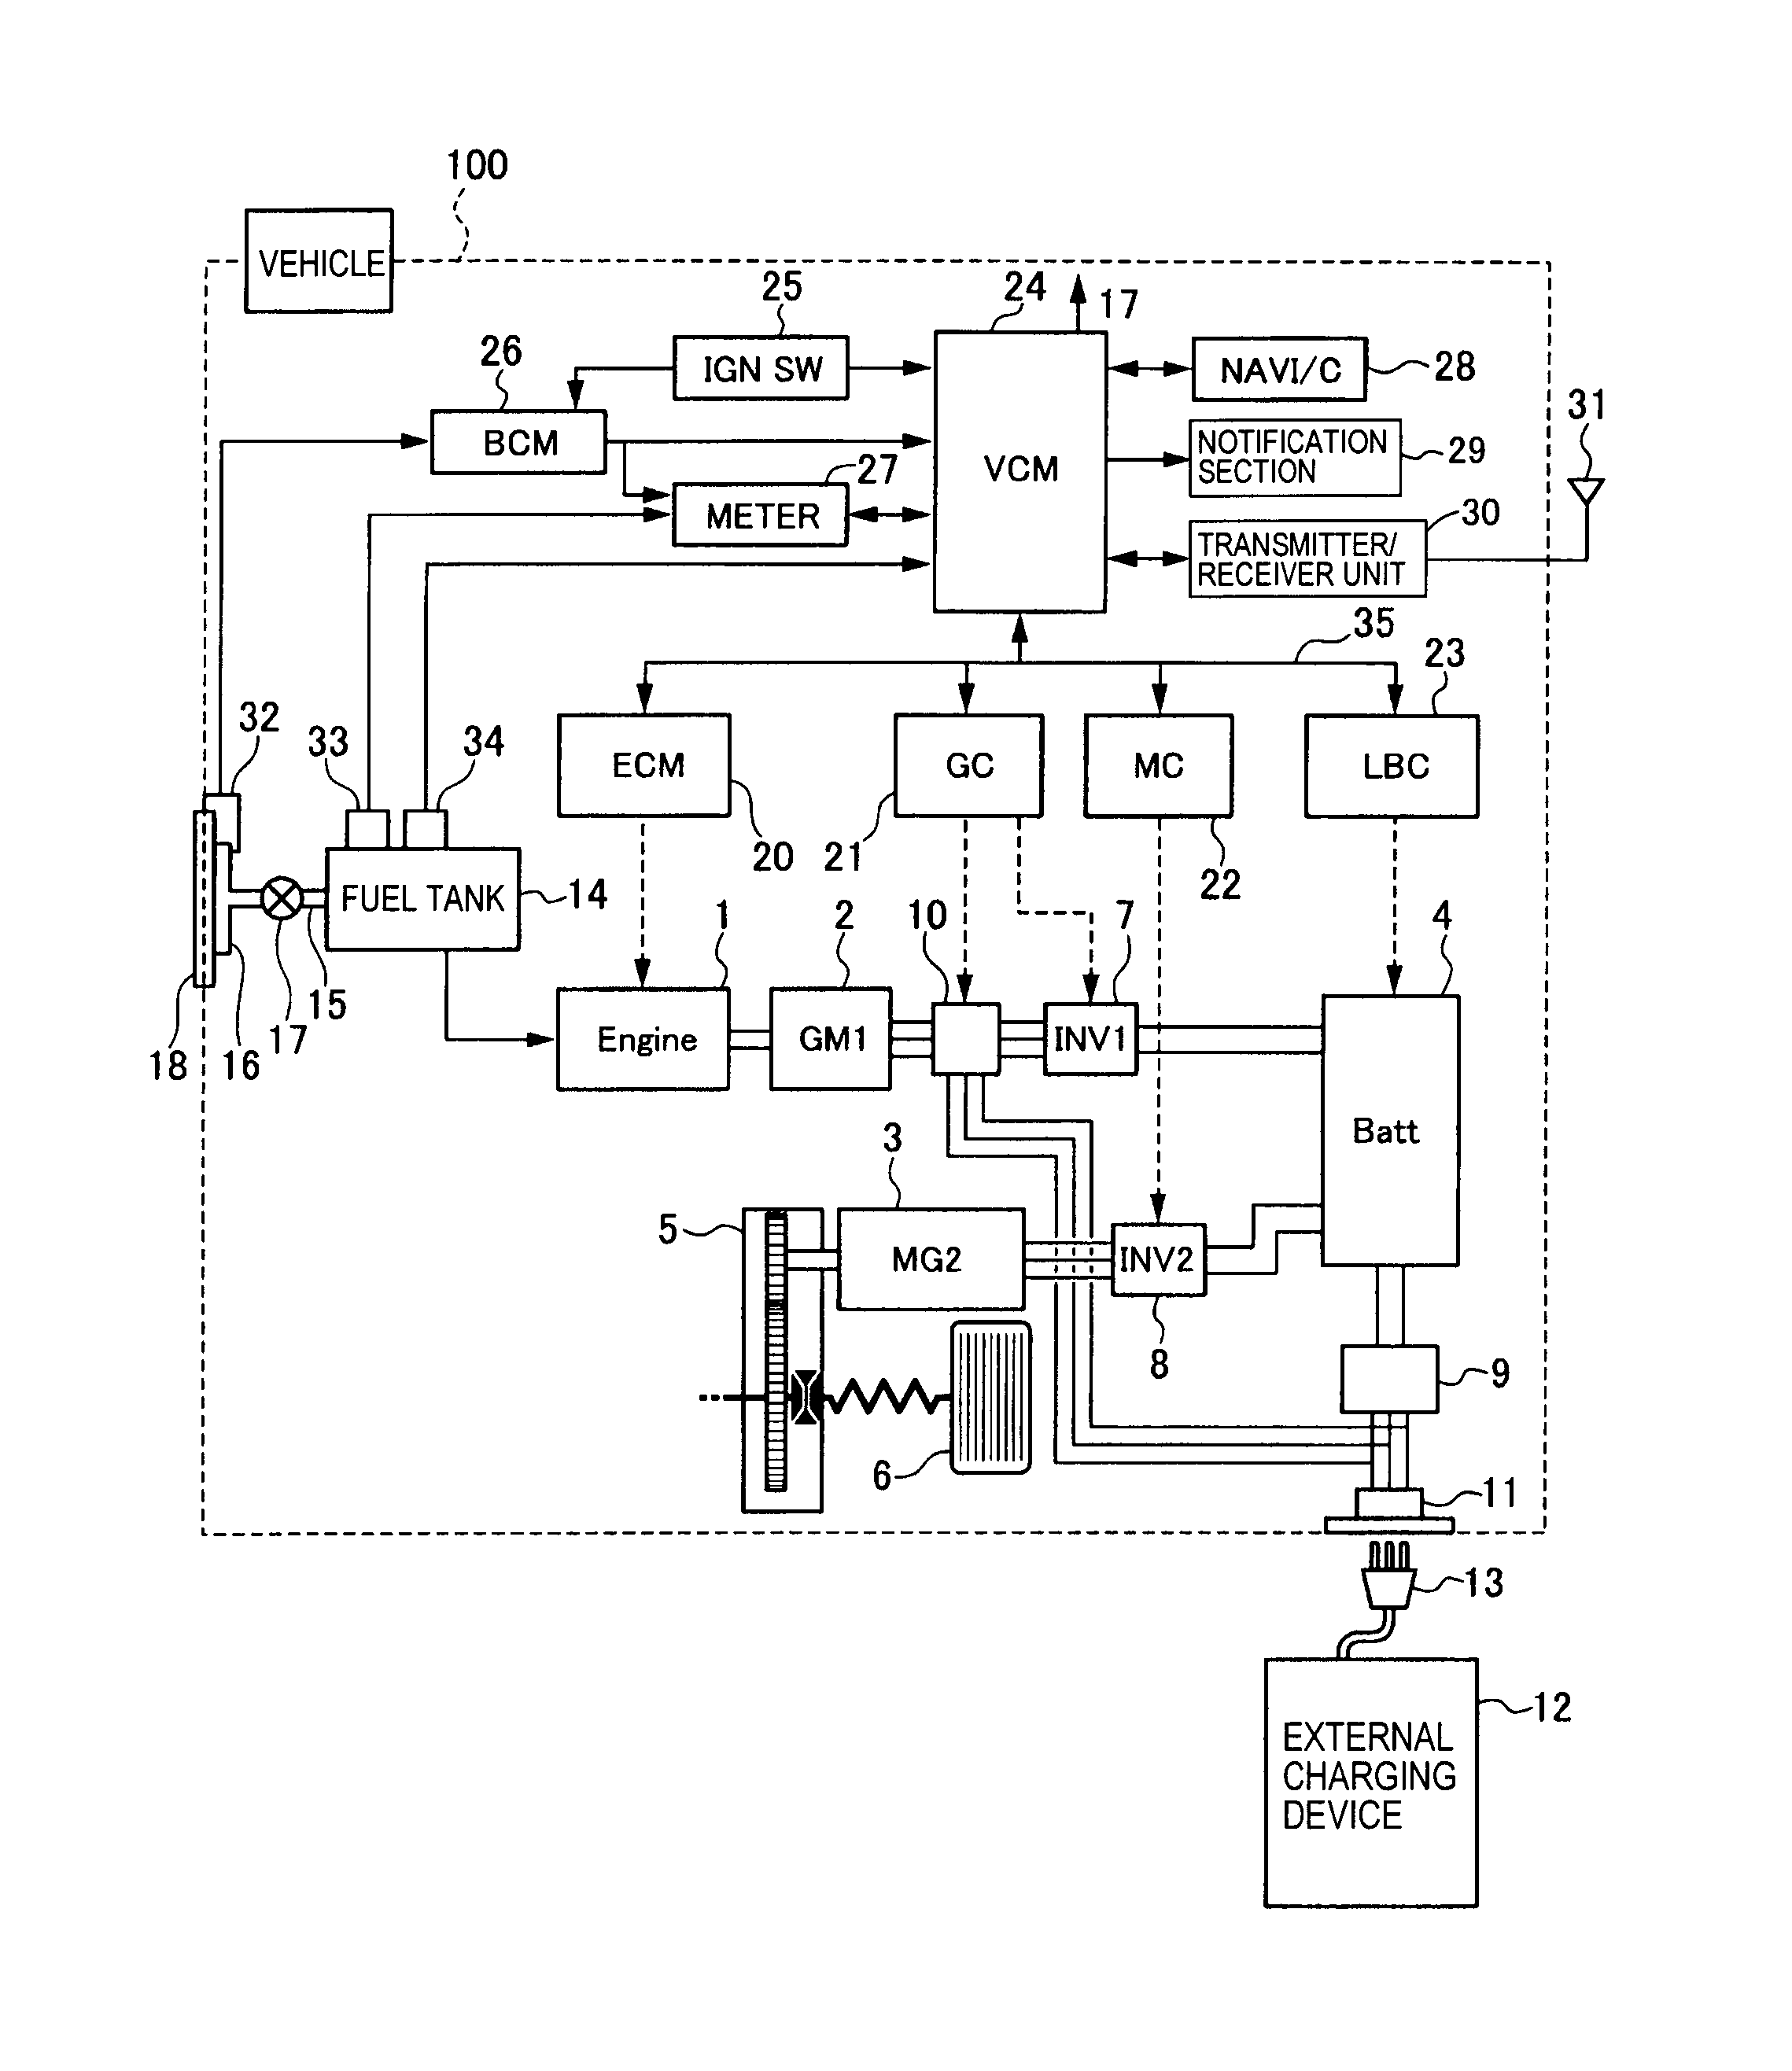 home zone 962680 wiring diagram